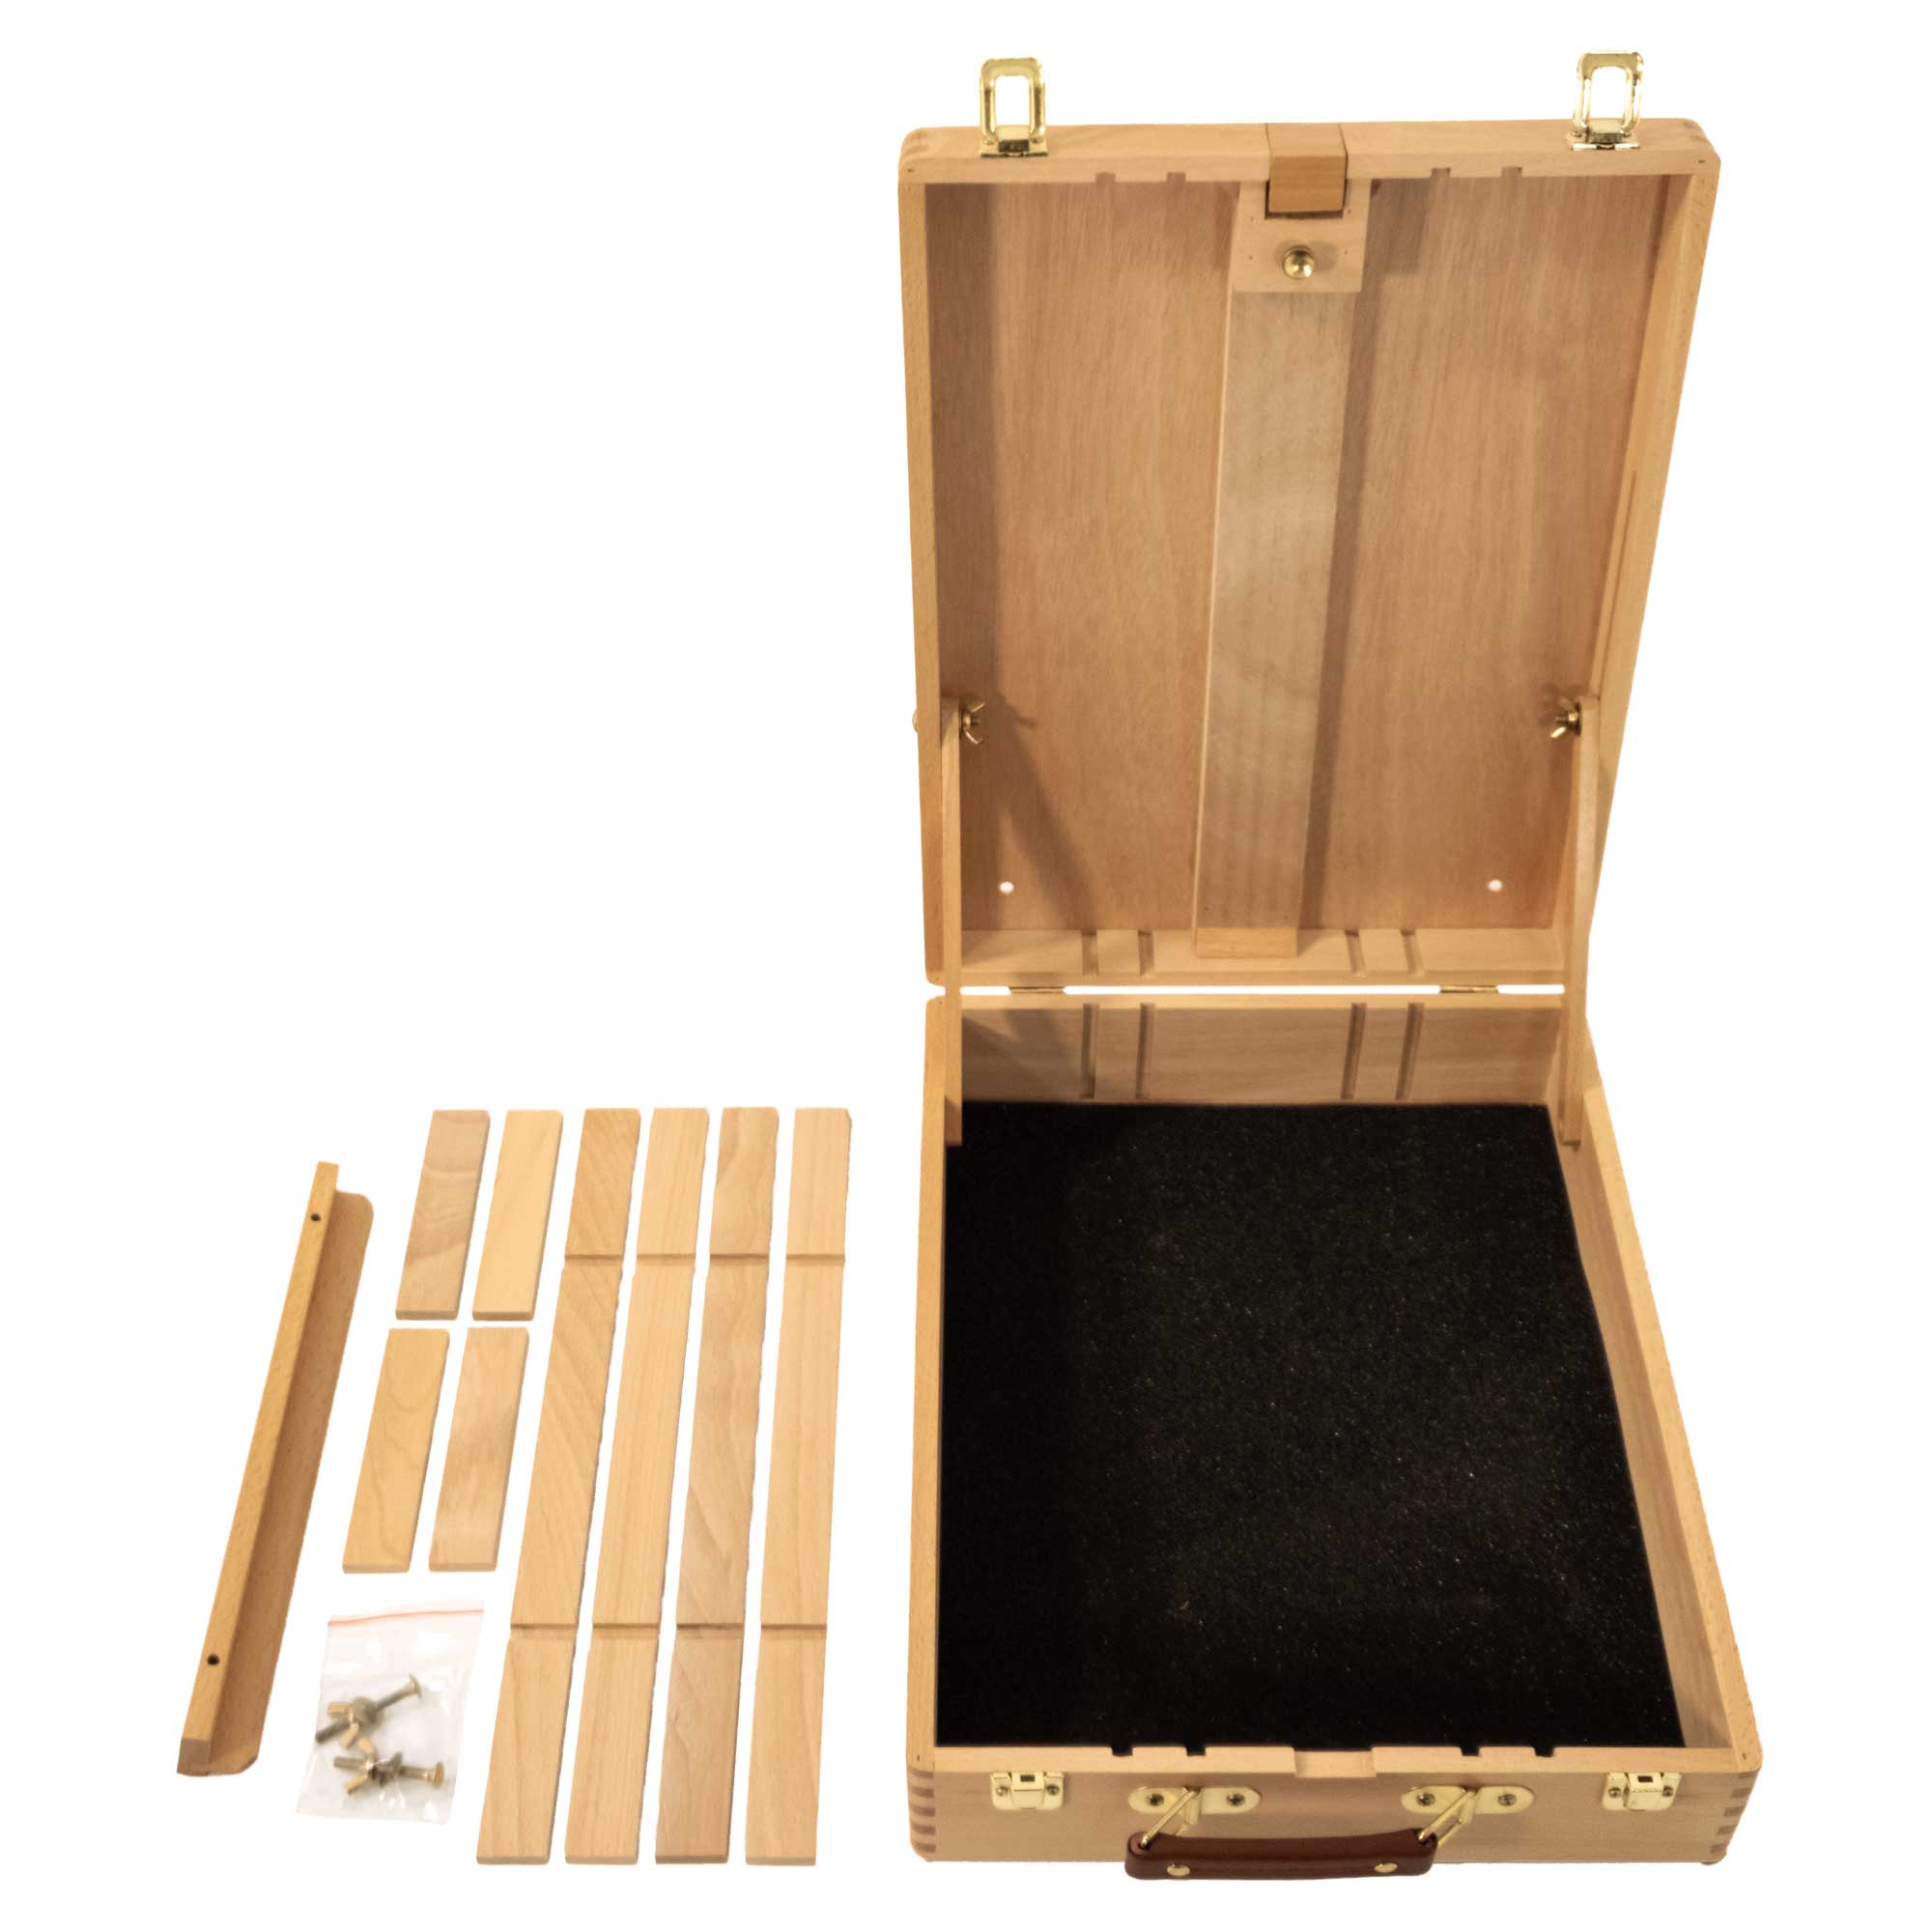 Loxley Chatsworth Duke Large Box Easel - Contents